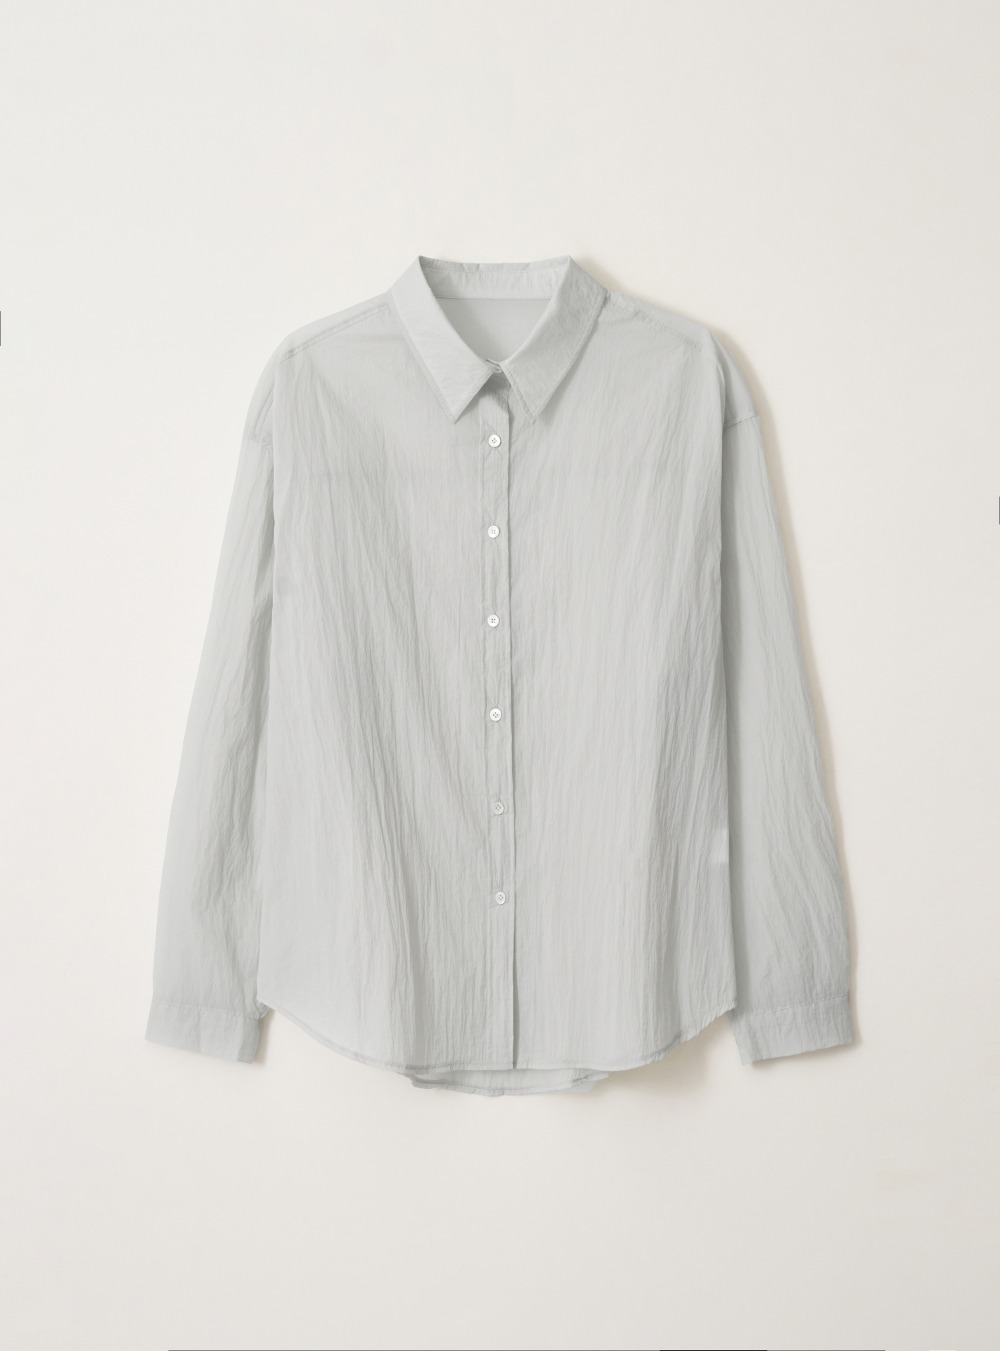 PAPER RELAXED SHIRT - GRAY